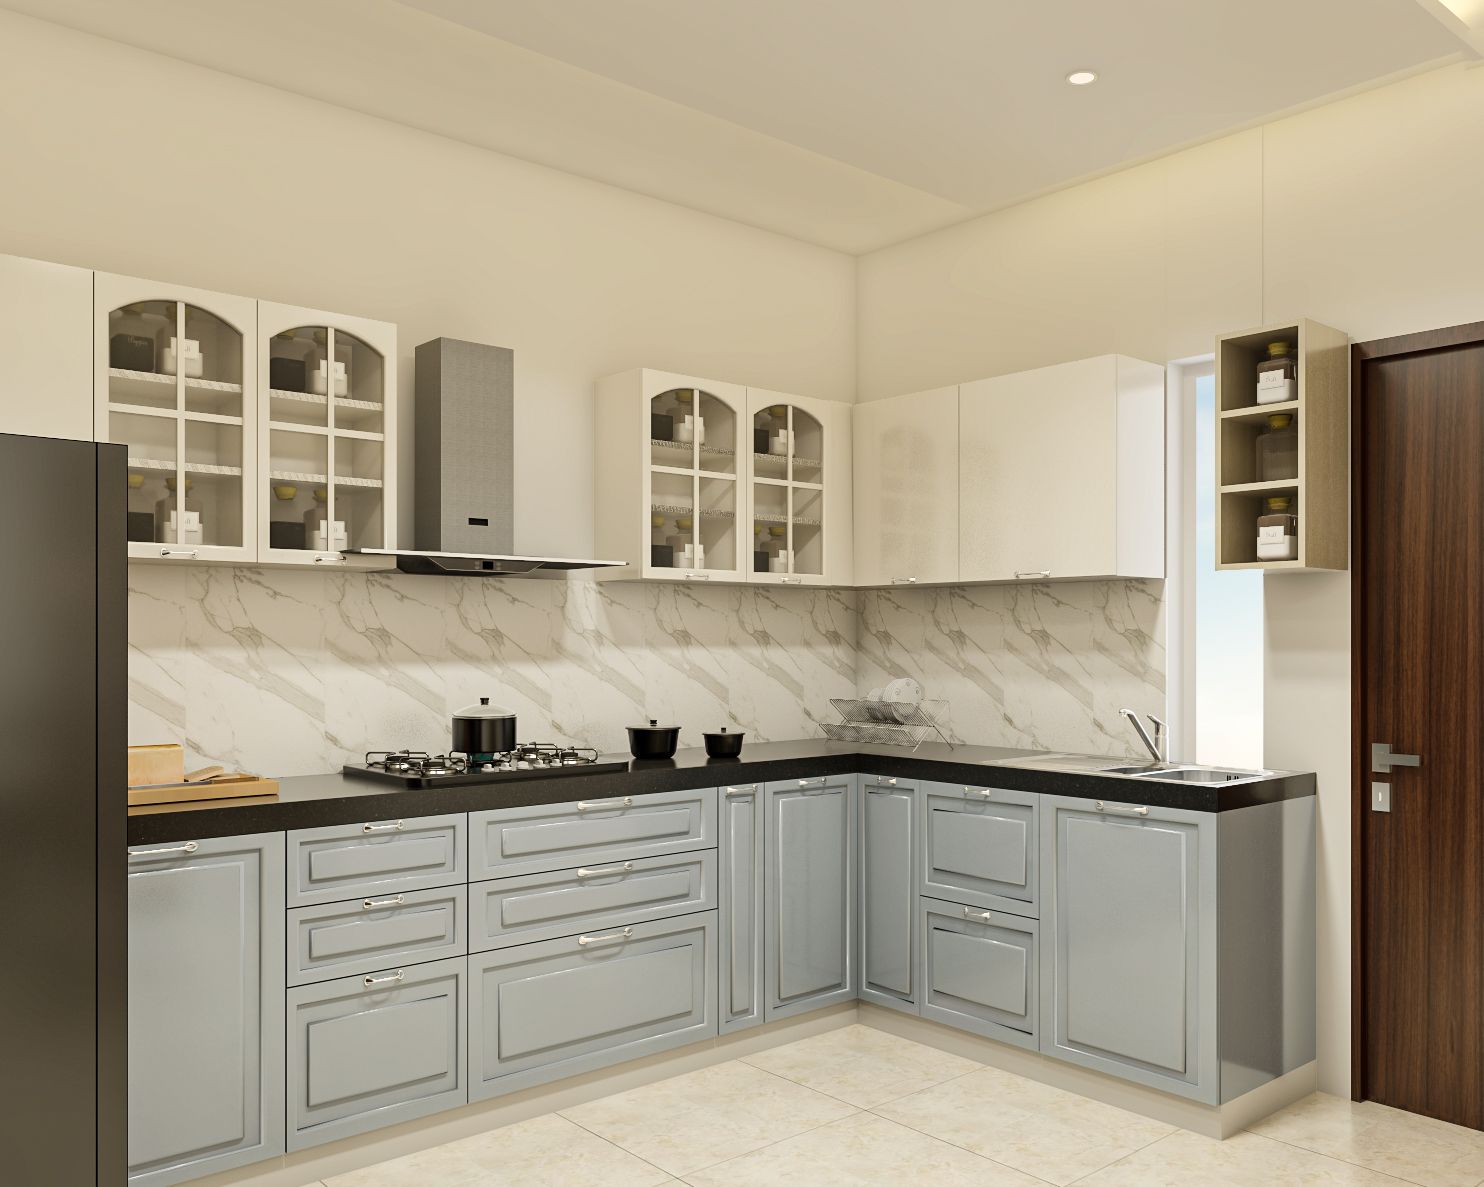 Contemporary L-Shaped Kitchen Design With Wall-Mounted Storage